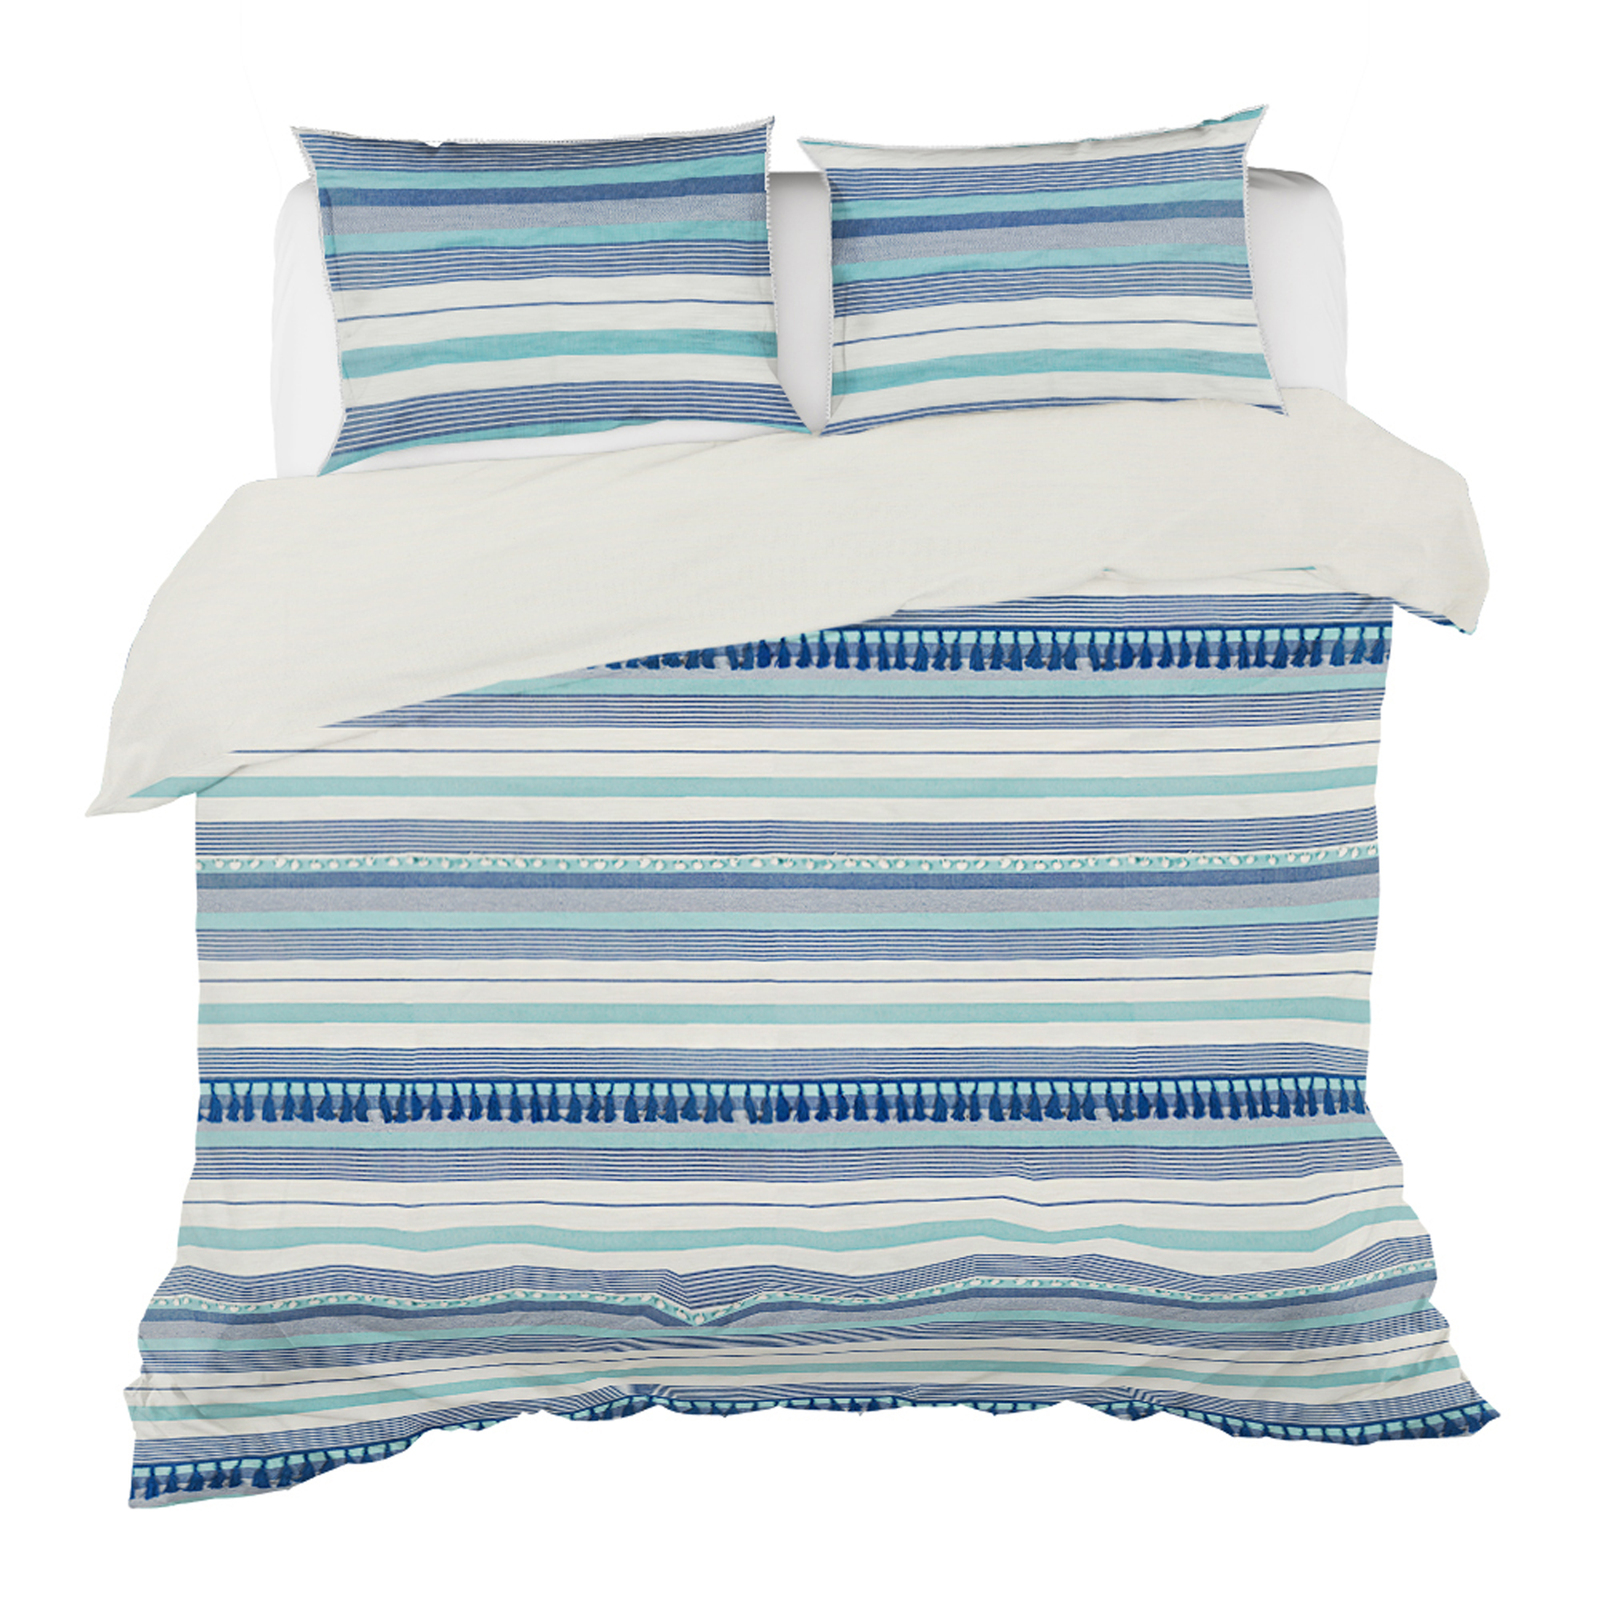 Primary image for Kingham Boho Grey Stripes Duvet Cover Set Twin XL (68"x92") with Pillow Sham